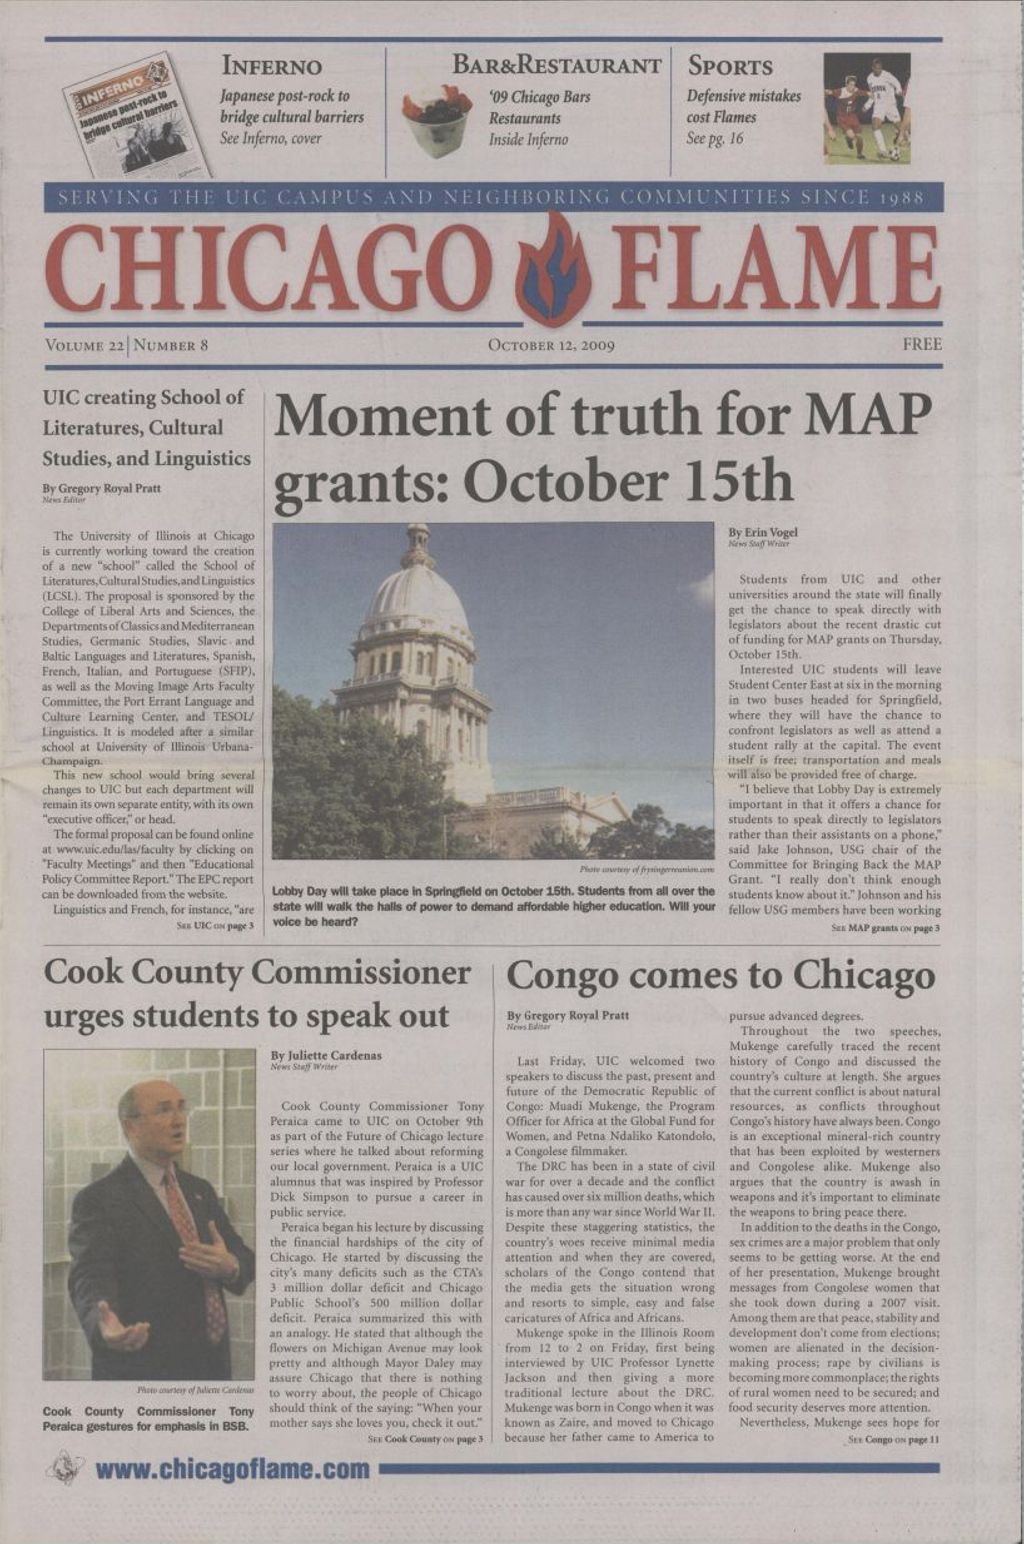 Miniature of Chicago Flame (October 12, 2009)